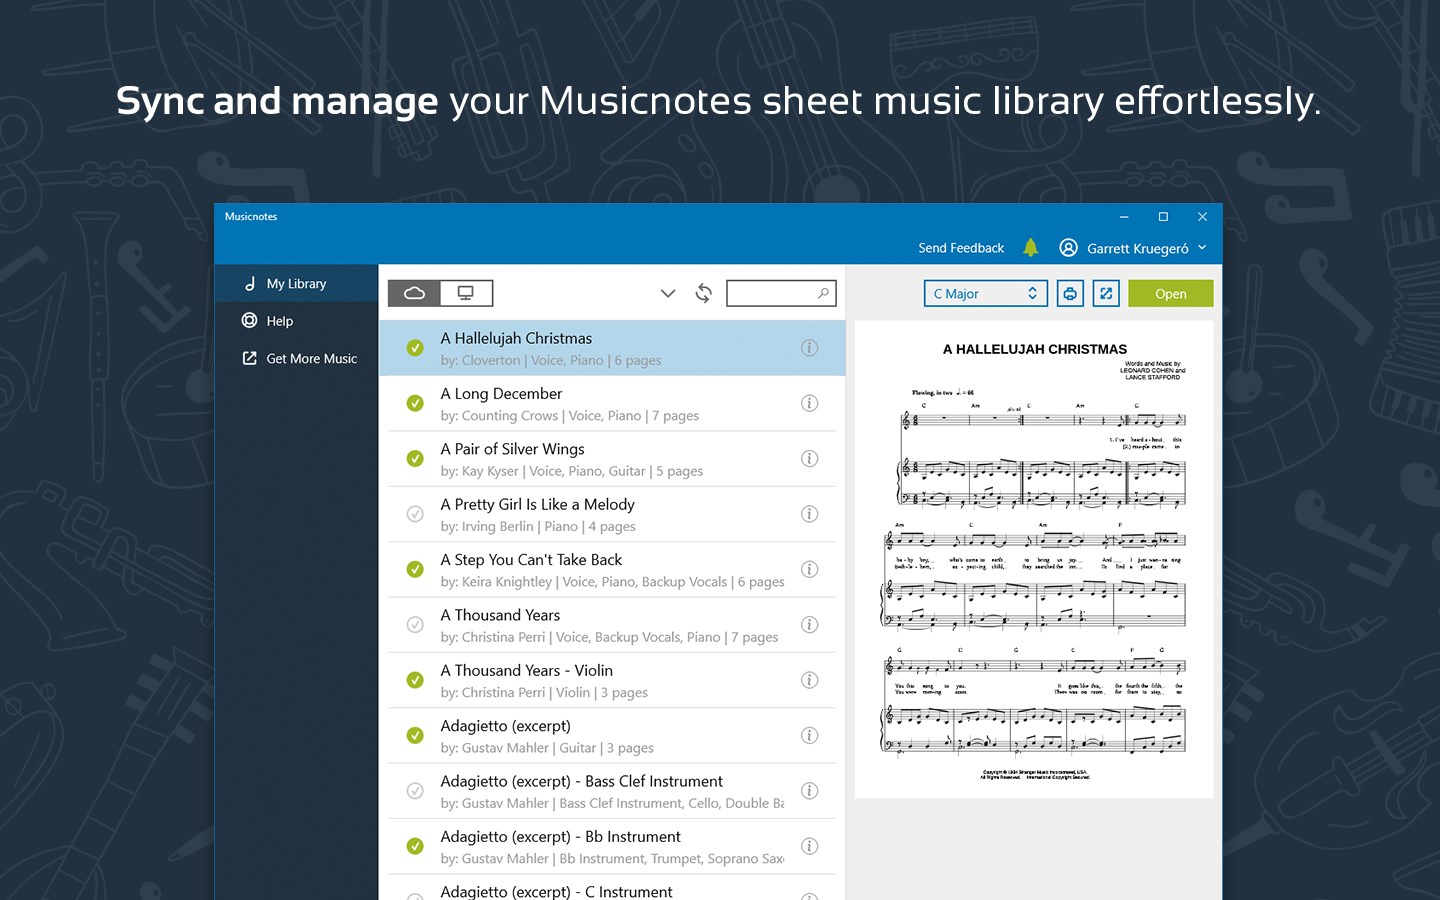 Musicnotes Sheet Music Player for Windows 10